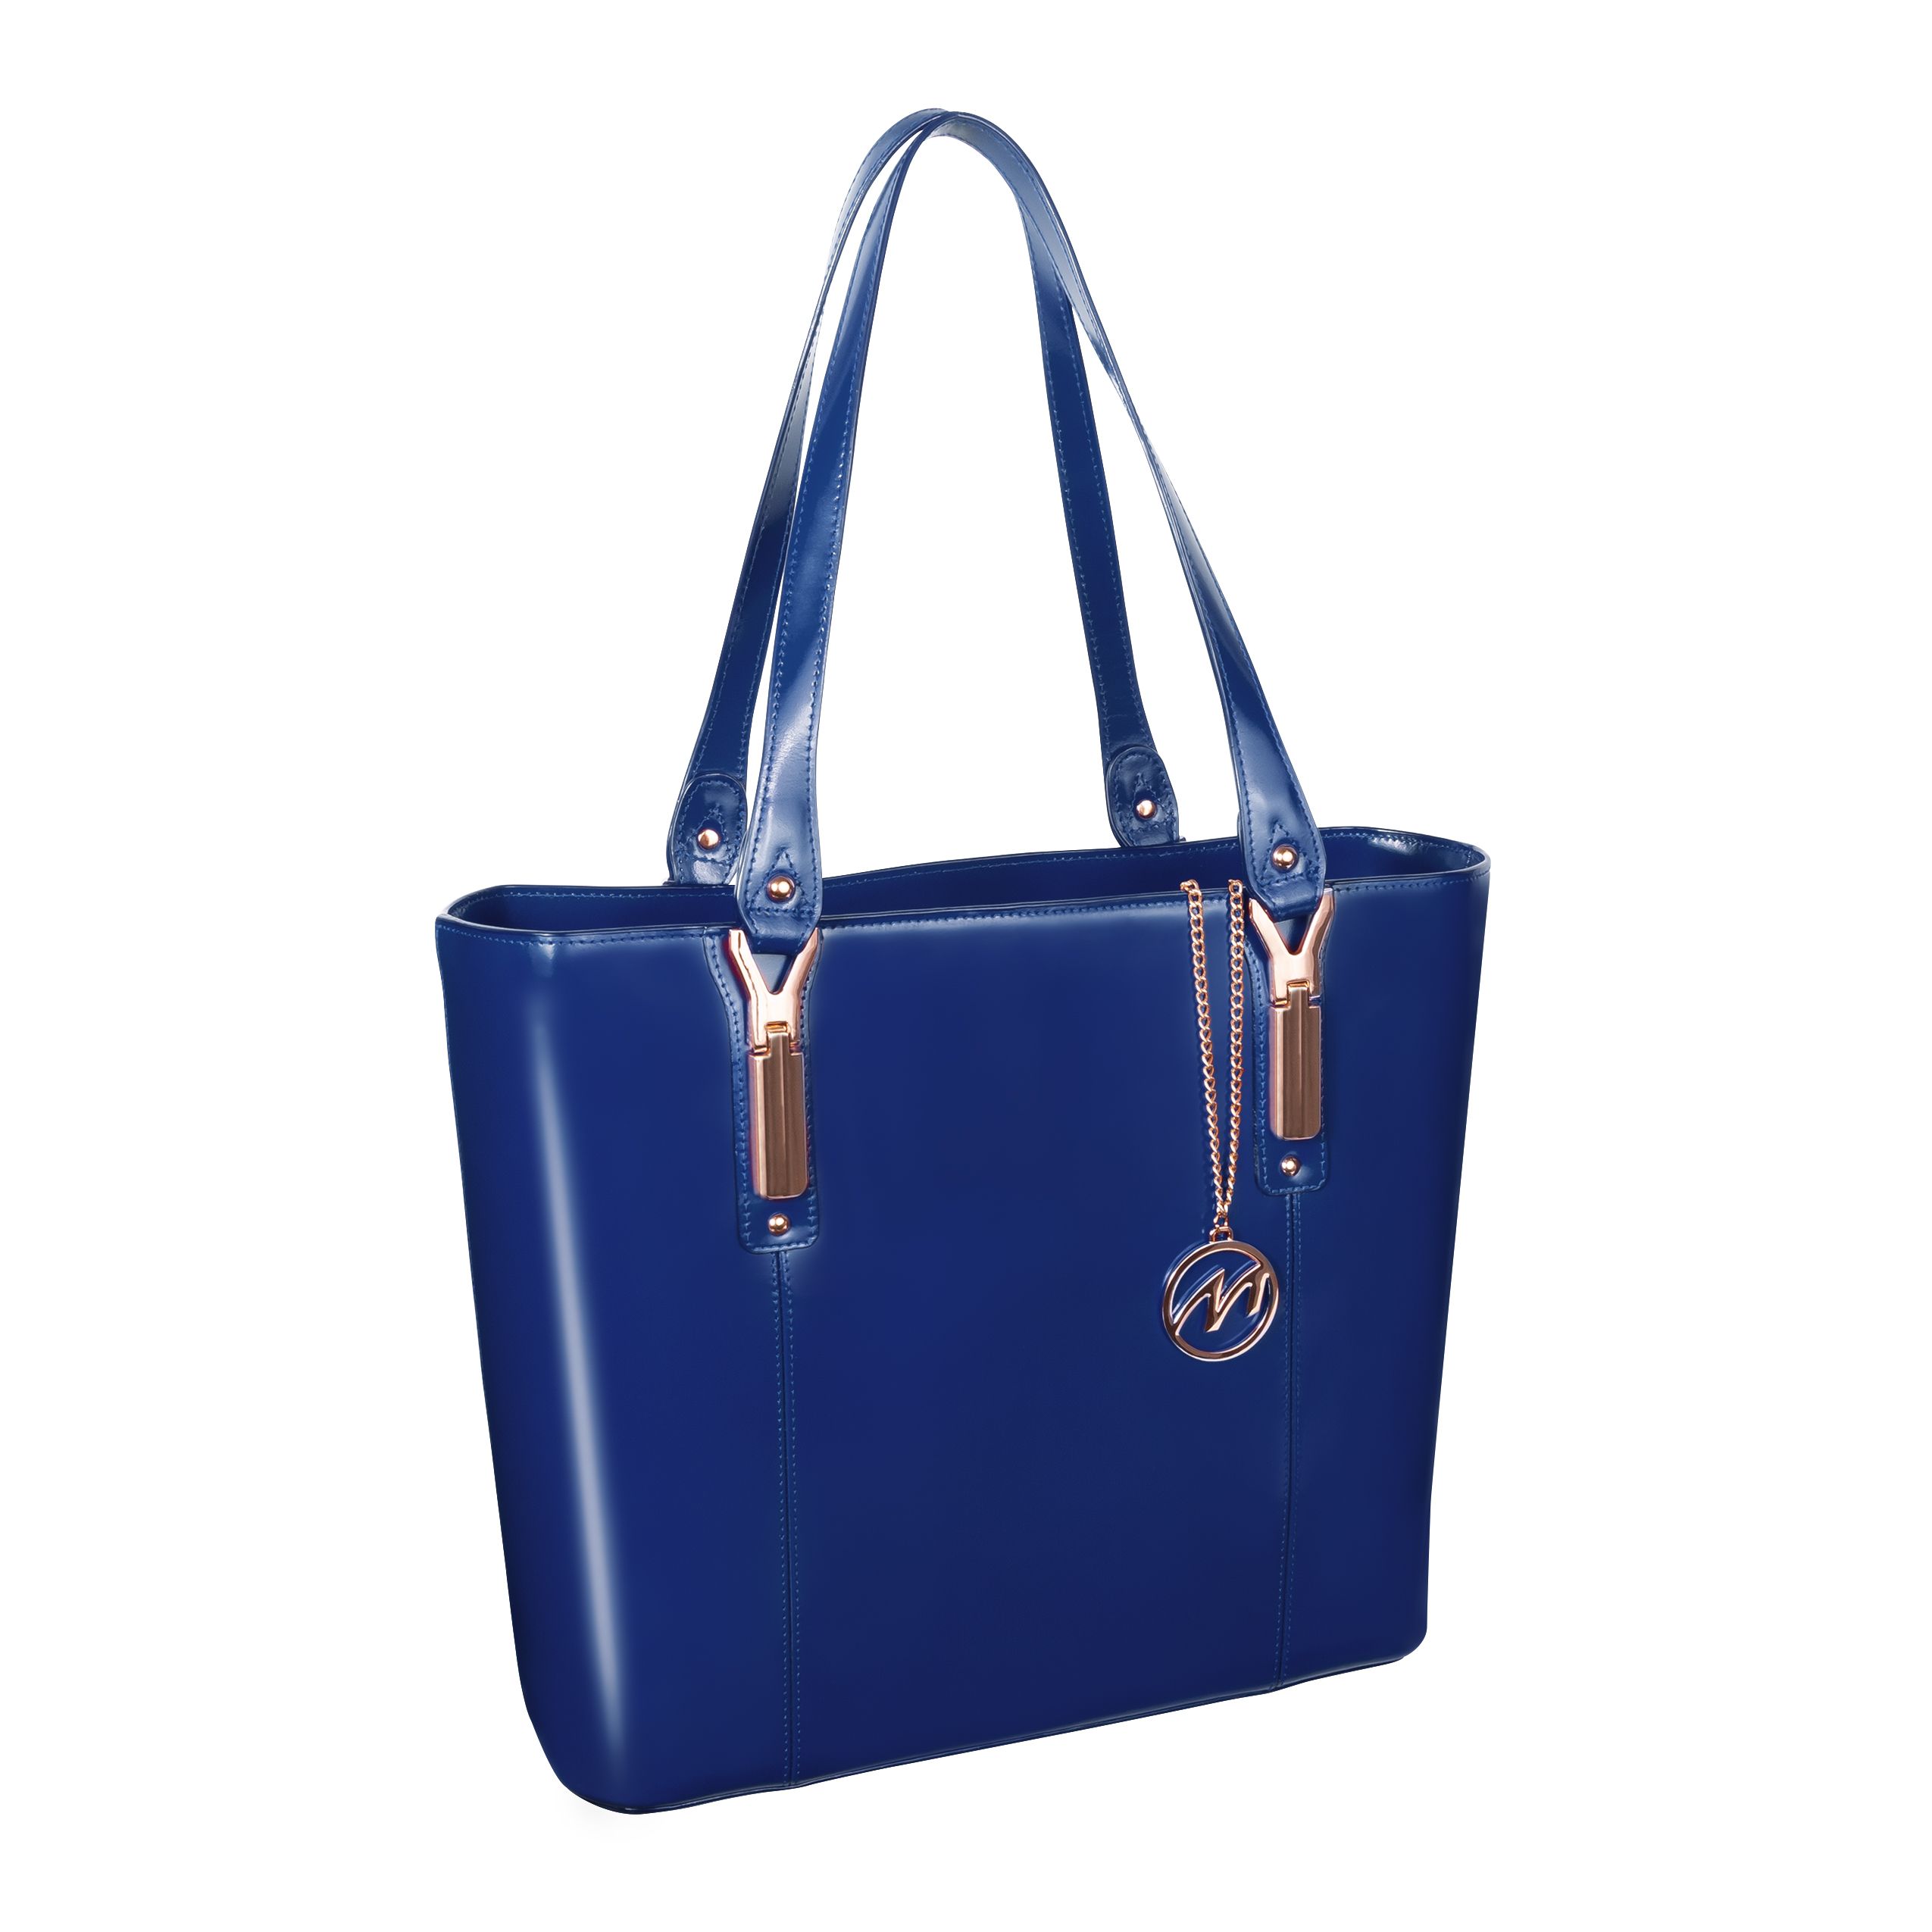 Picture of McKlein 97577 Savarna Leather Shoulder Tote Bag- Navy - 14.5 x 5 x 13 in.